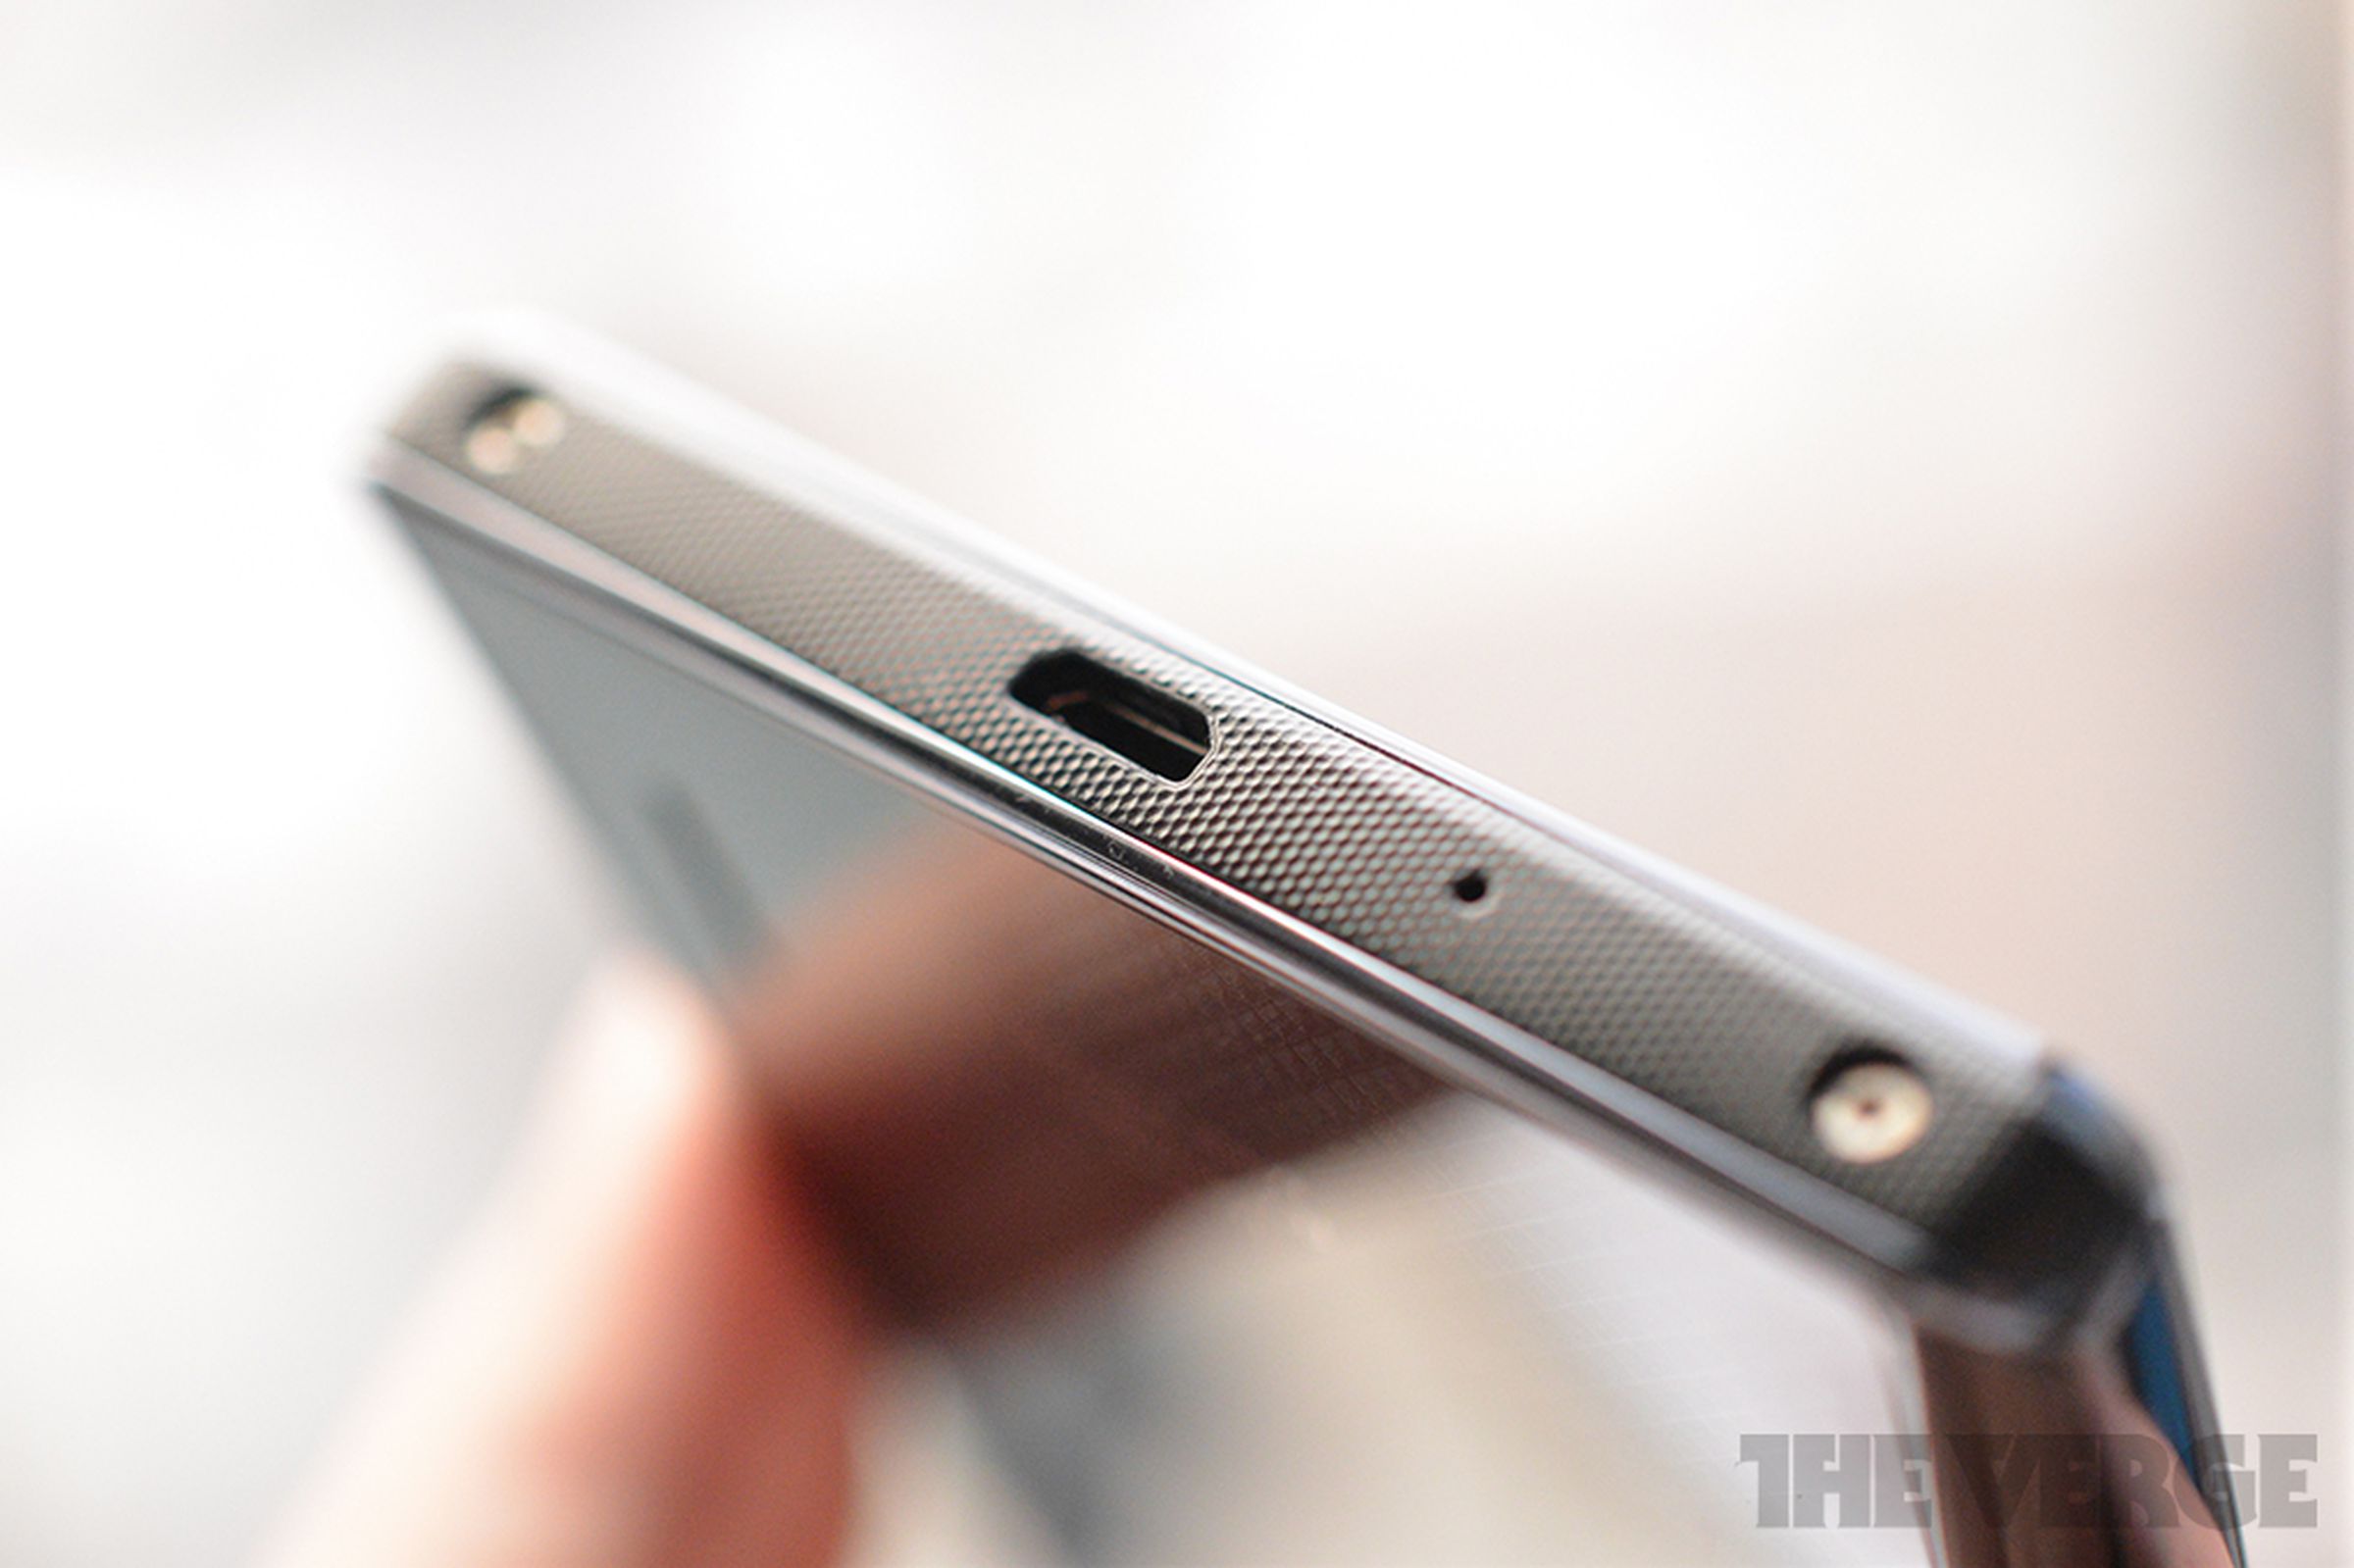 LG Optimus G for AT&T (hands-on pictures)